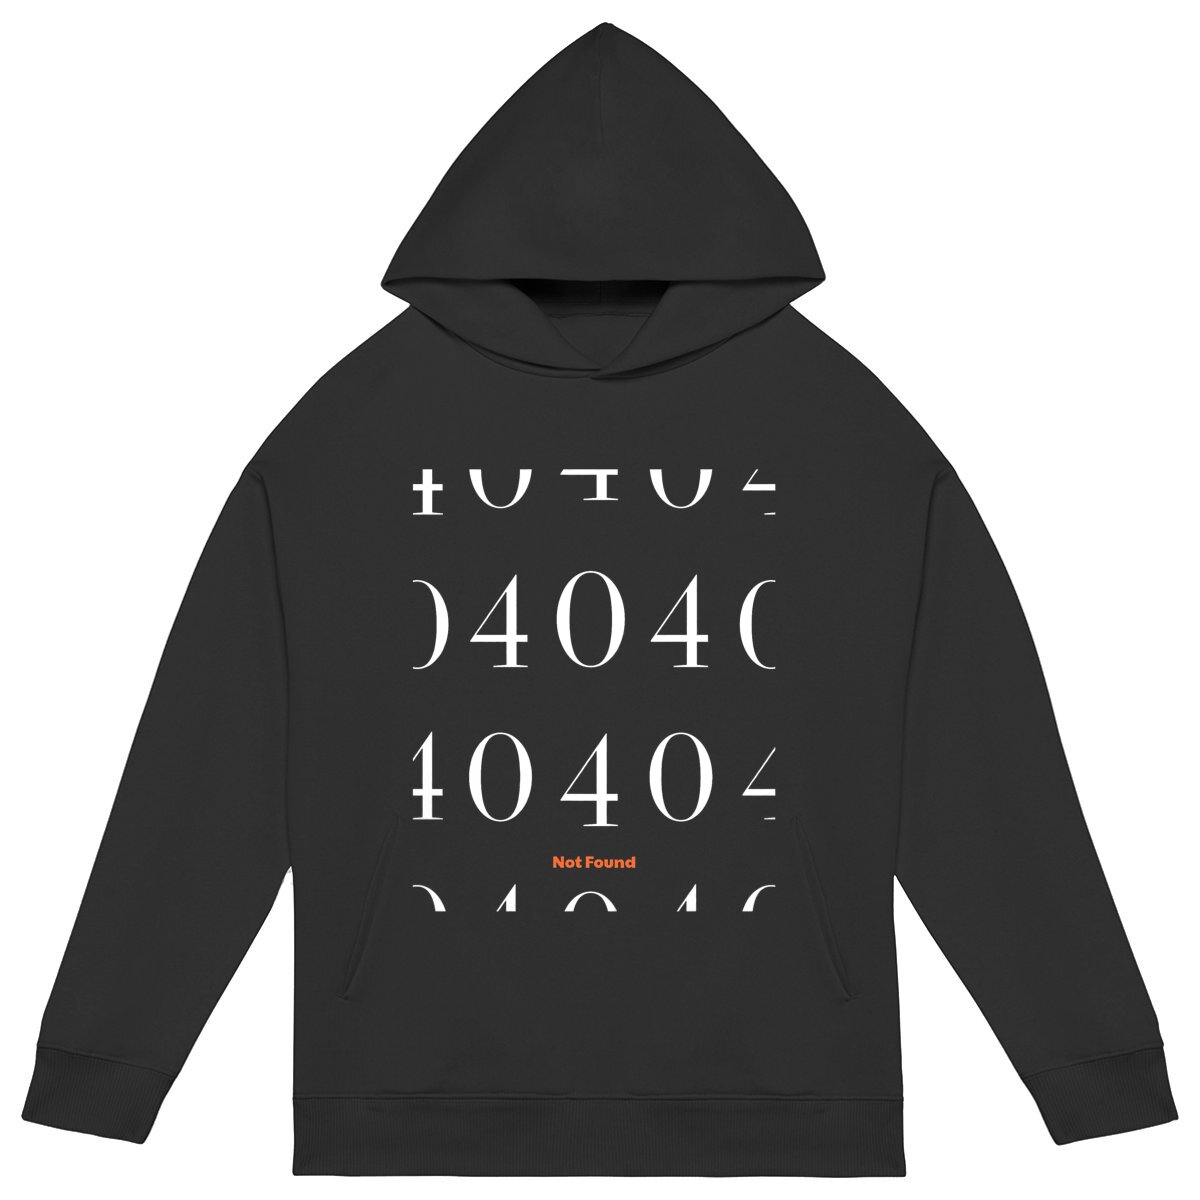 Your New Favorite Oversized Hoodie